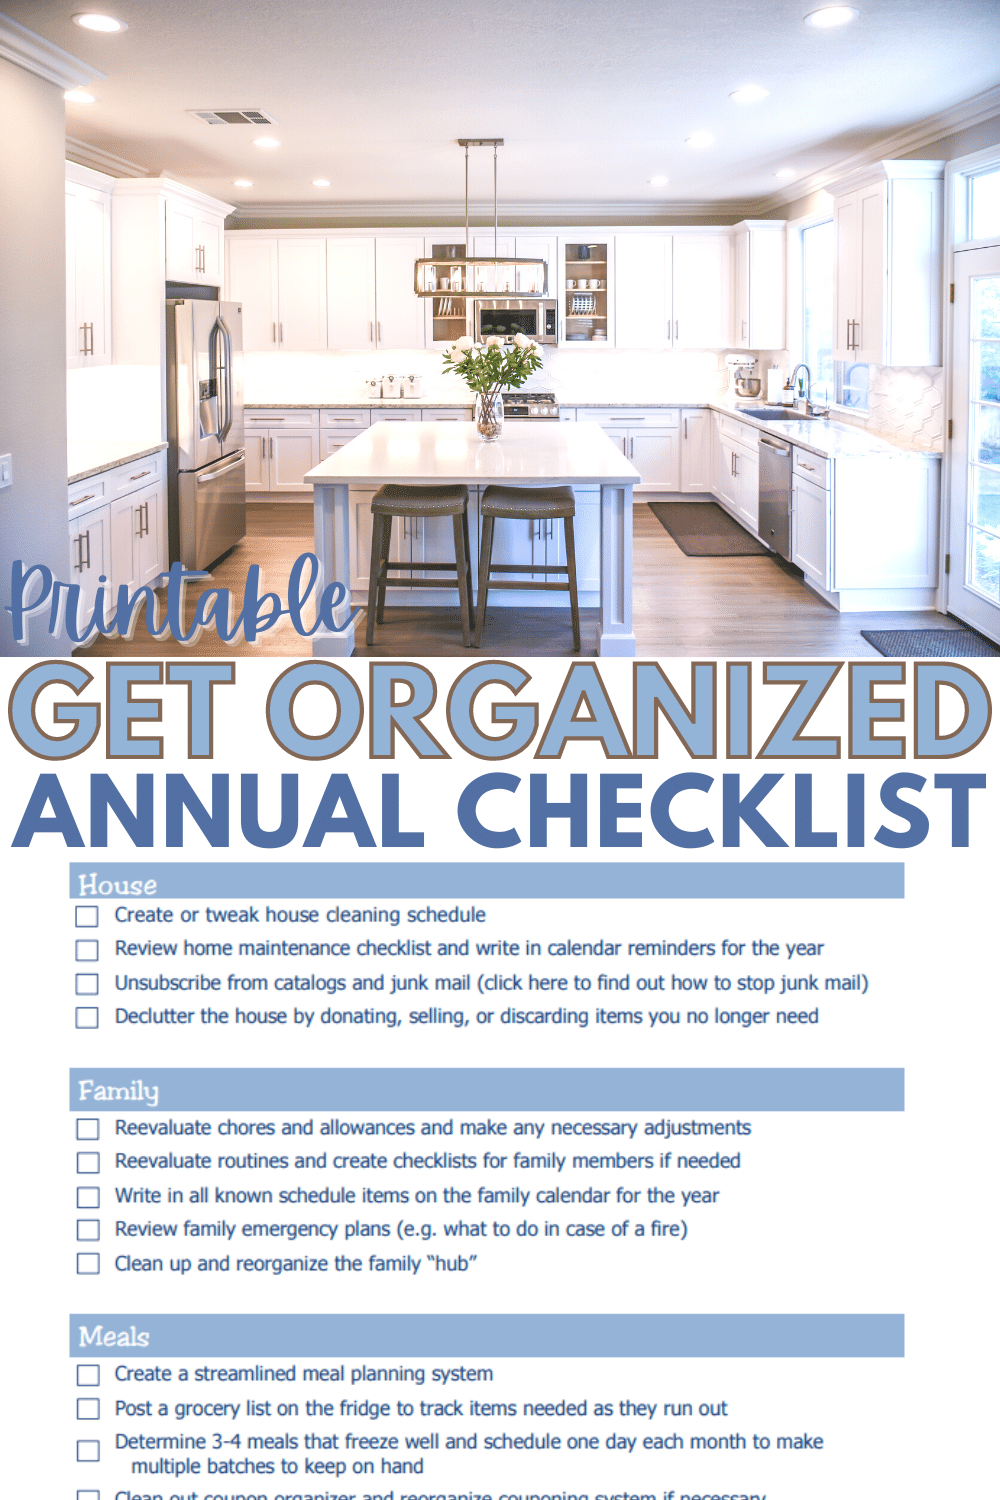 Are you finding that your usual habits and schedules needed to be readjusted? Here's a get organized checklist to help you analyze & organize your life. #organize #organization #checklist #printable via @wondermomwannab